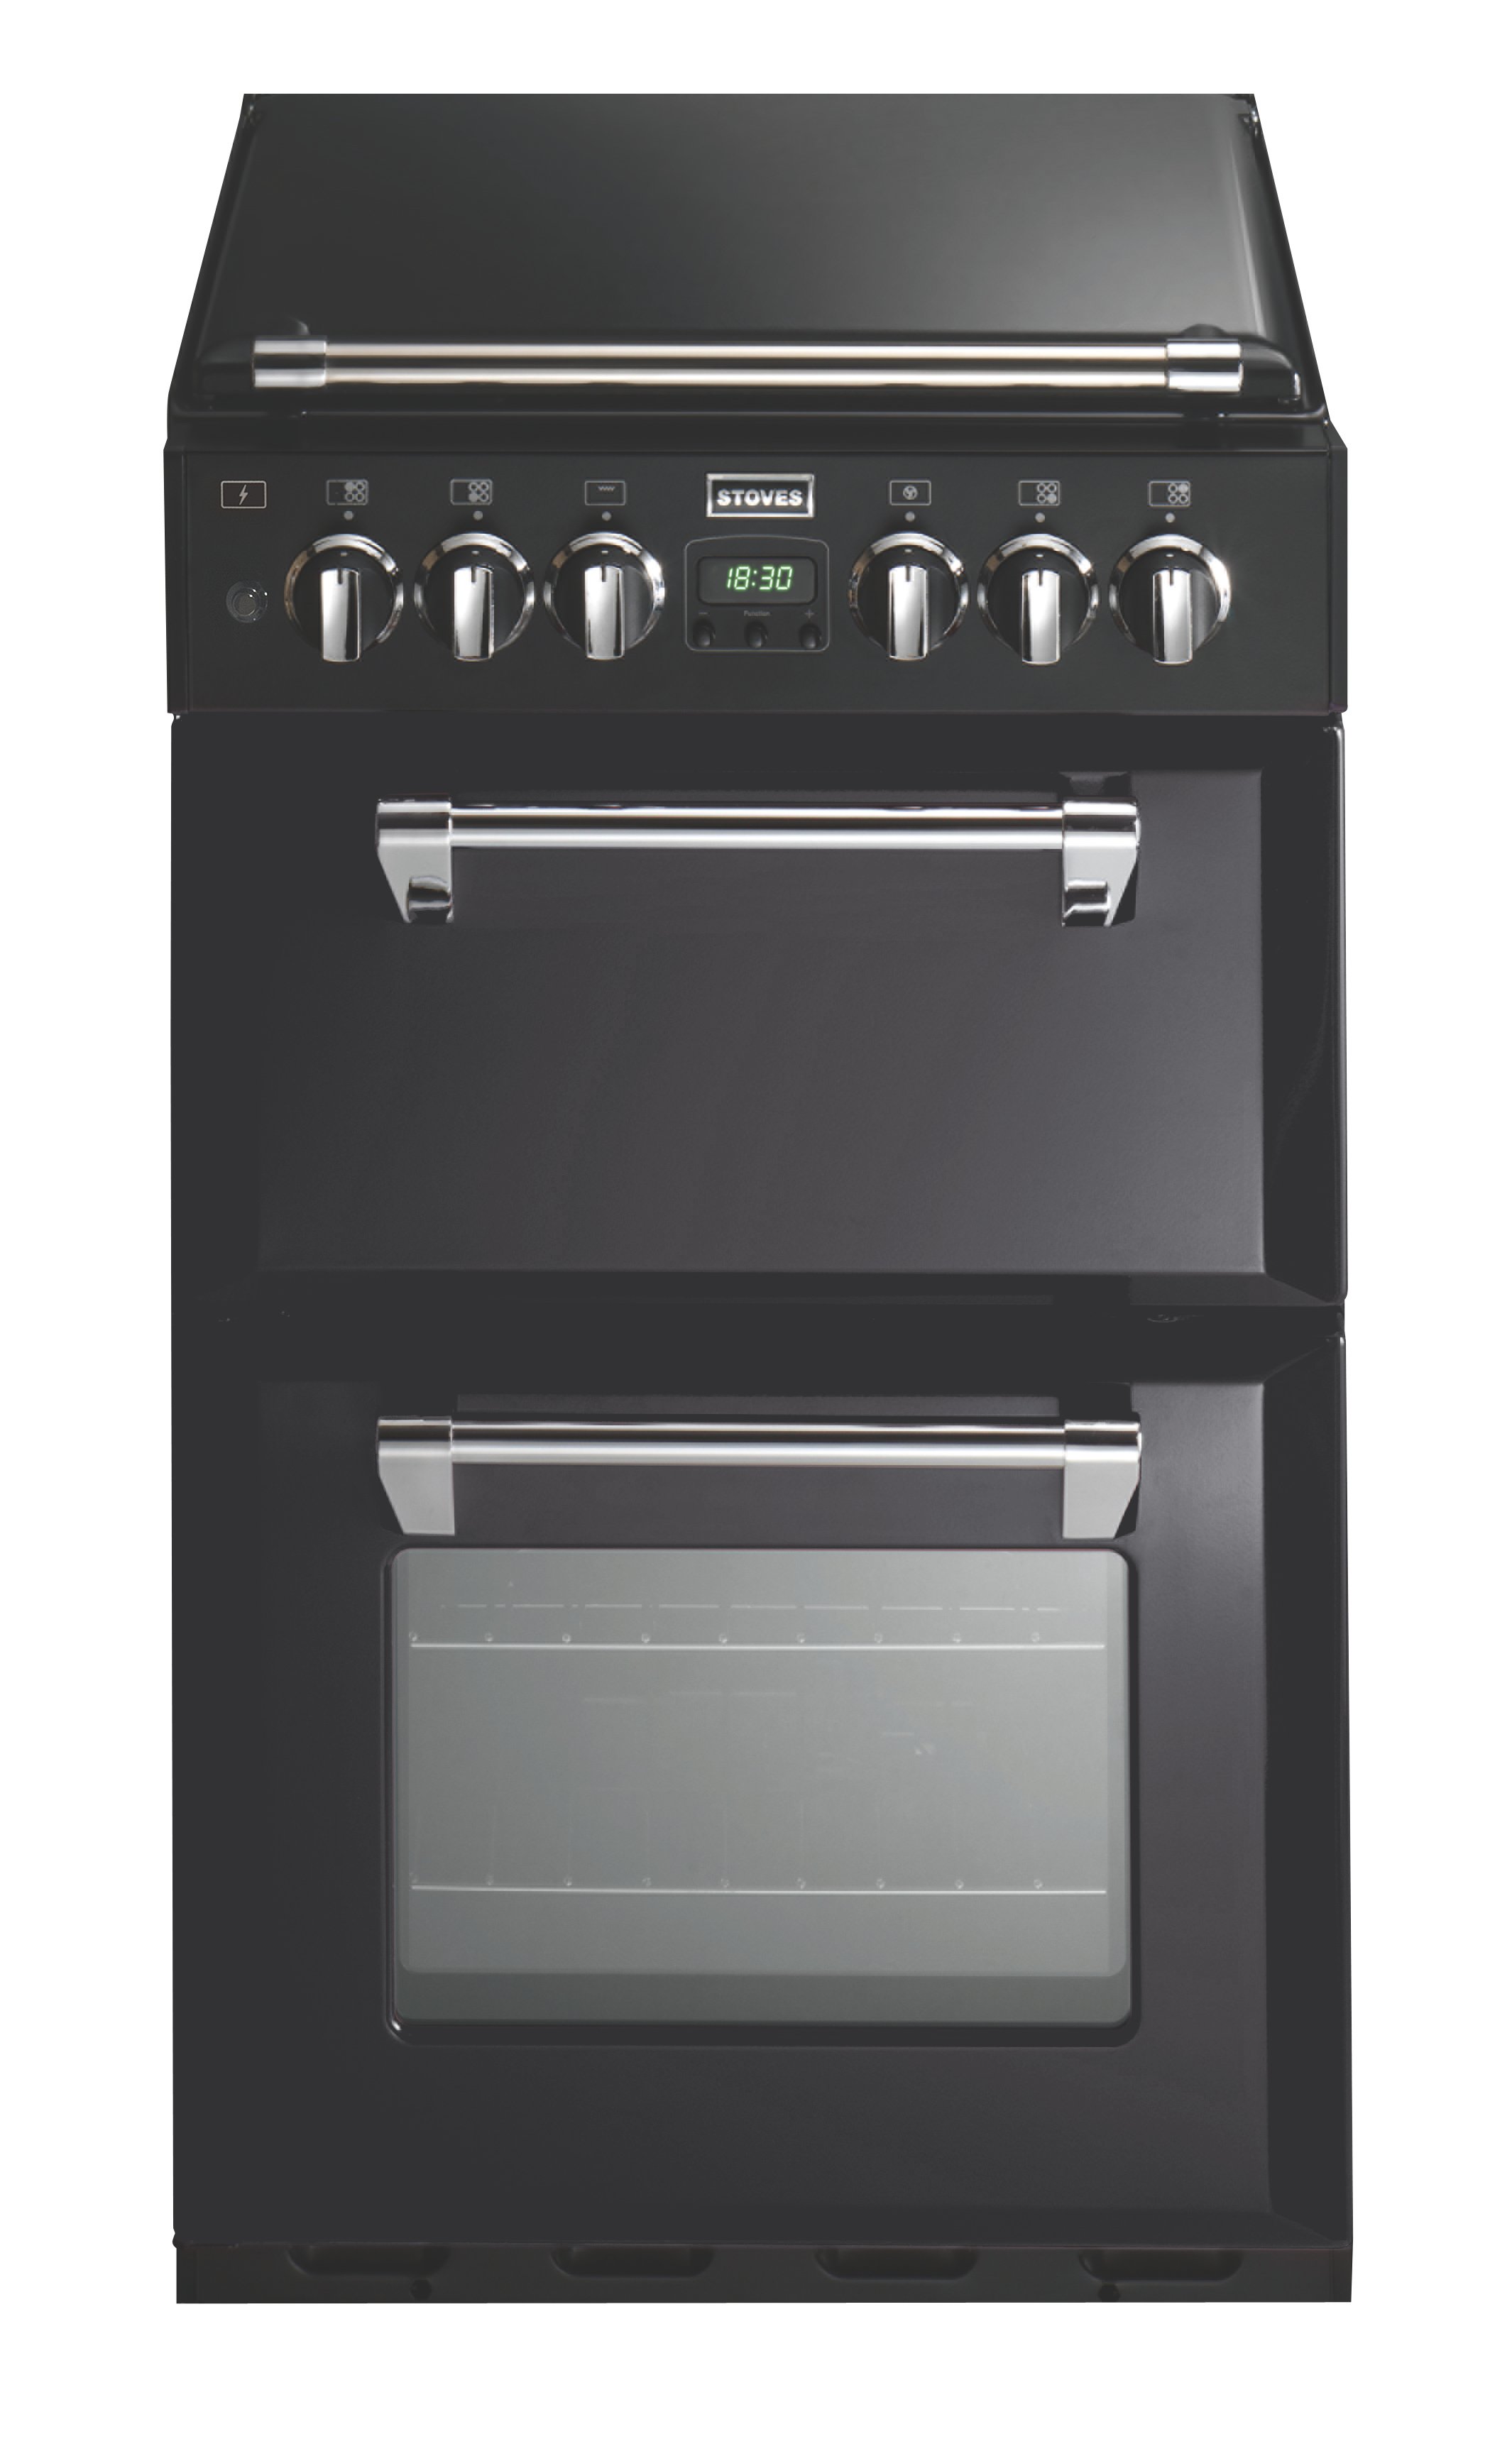 55cm dual fuel double oven offers a programmable timer, defrost and dough proving functions, a powerful Wok burner and cast iron pan supports. A/A energy rating.